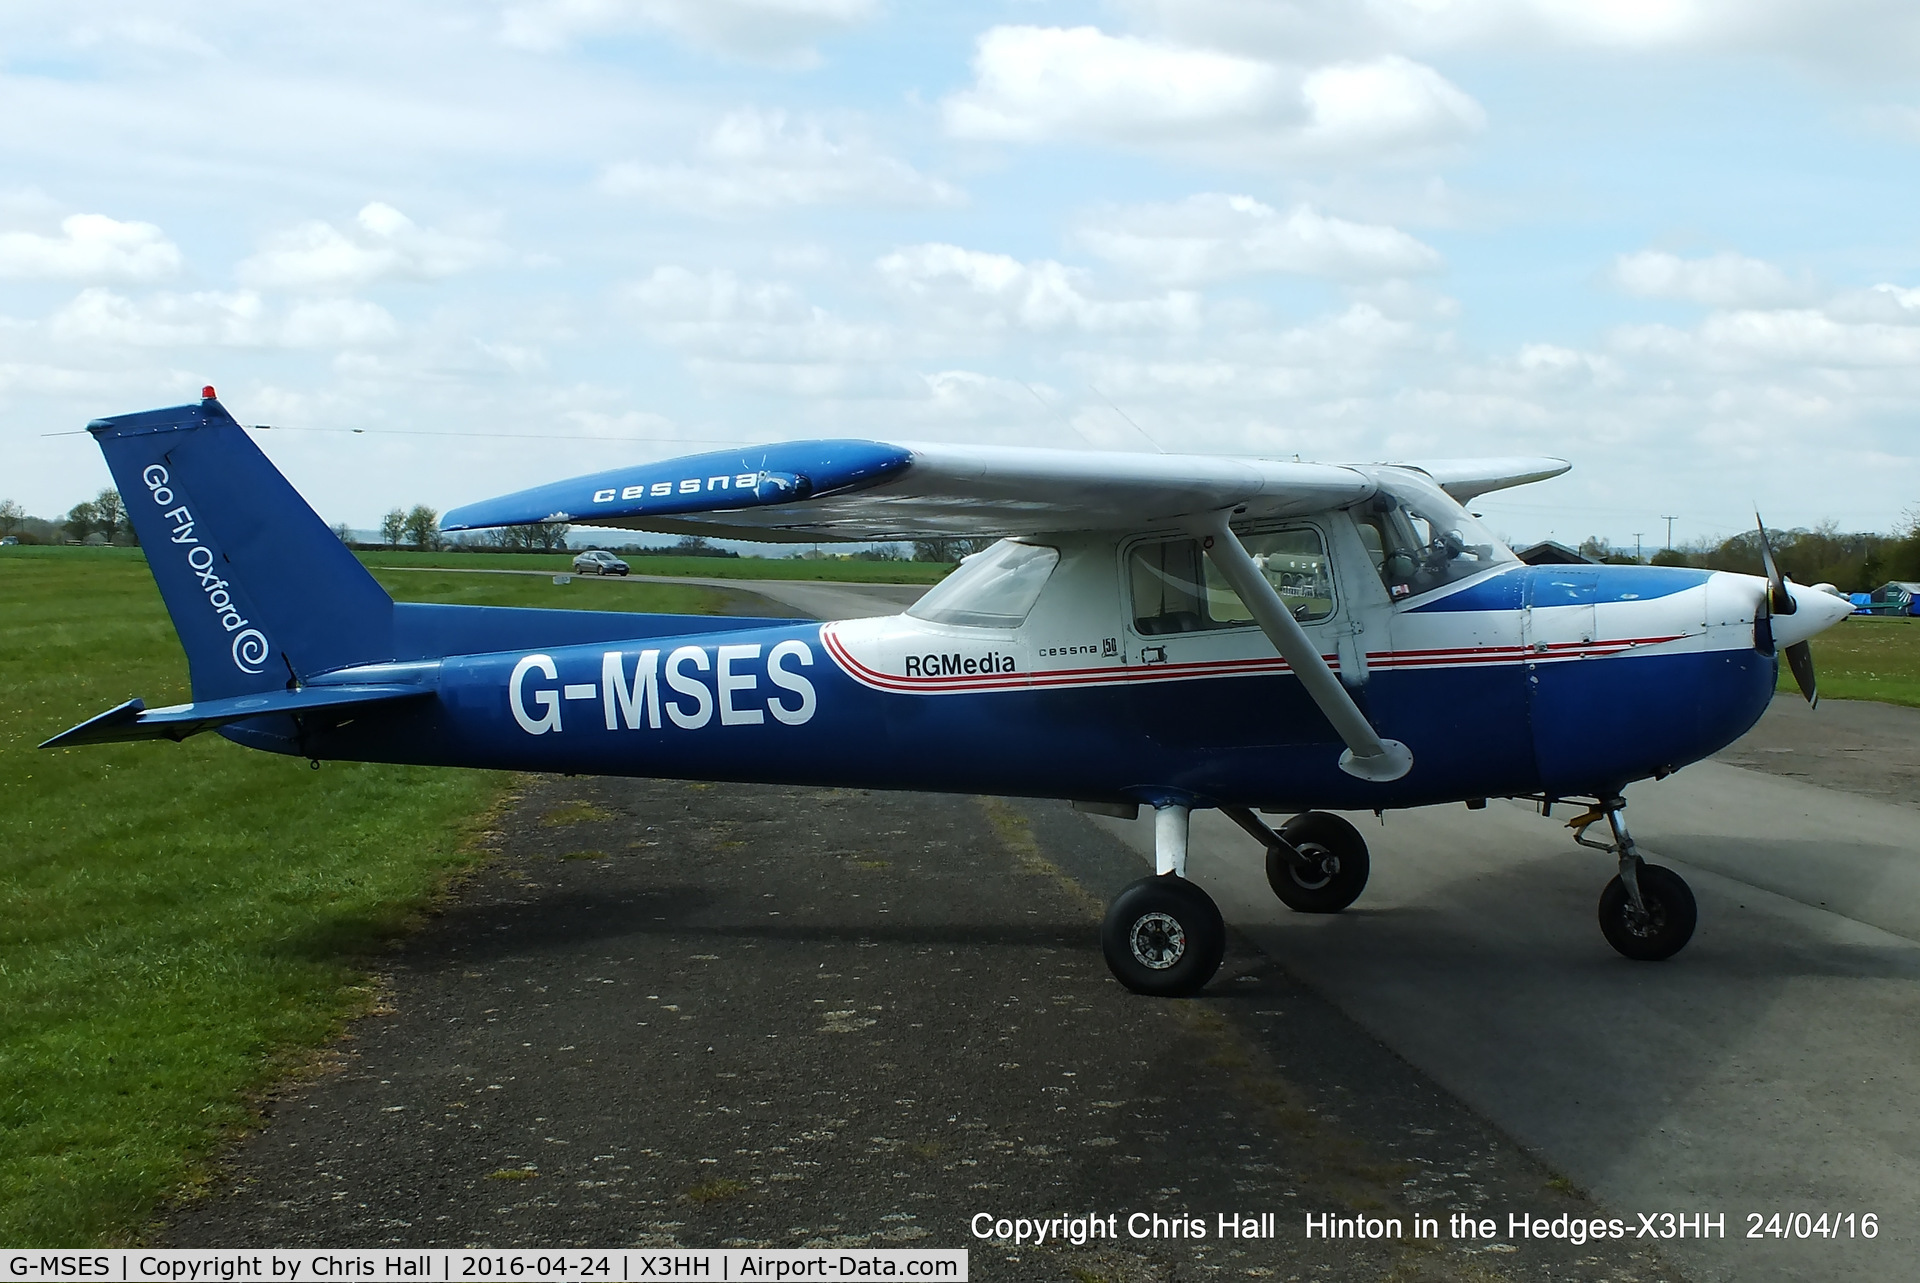 G-MSES, 1972 Cessna 150L C/N 150-72747, at Hinton in the Hedges